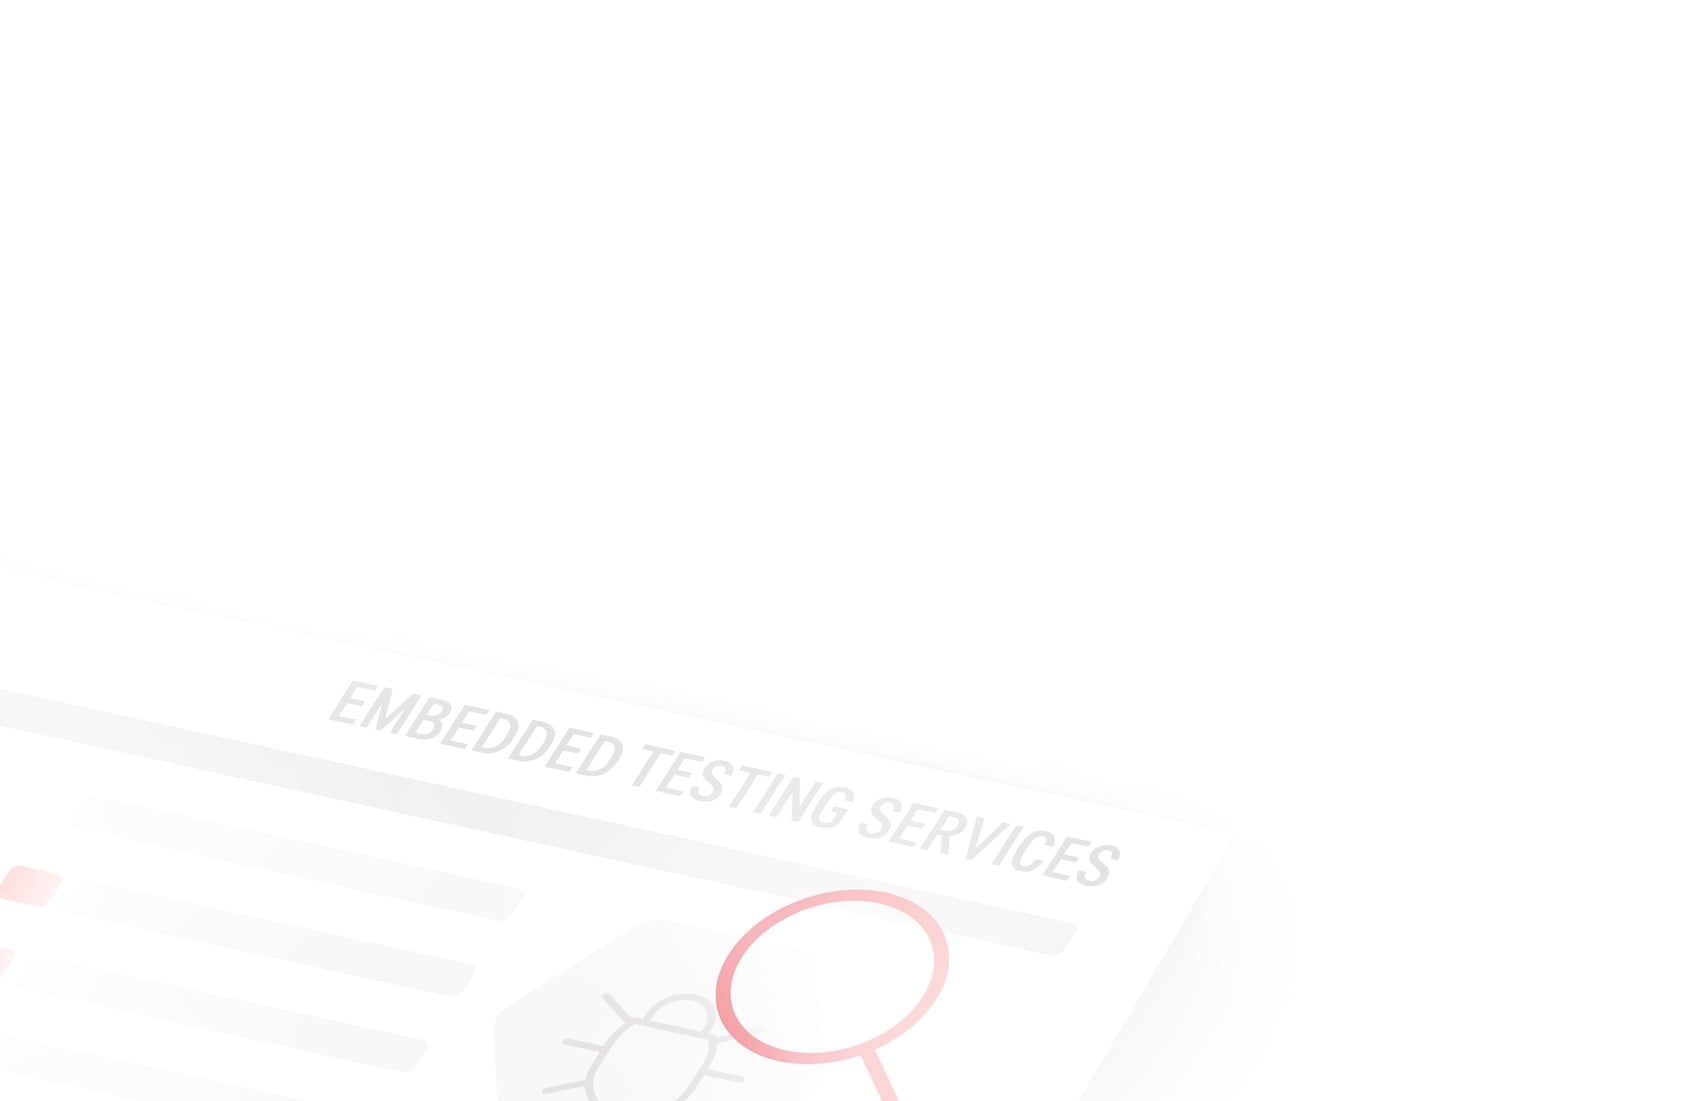 Embedded testing services